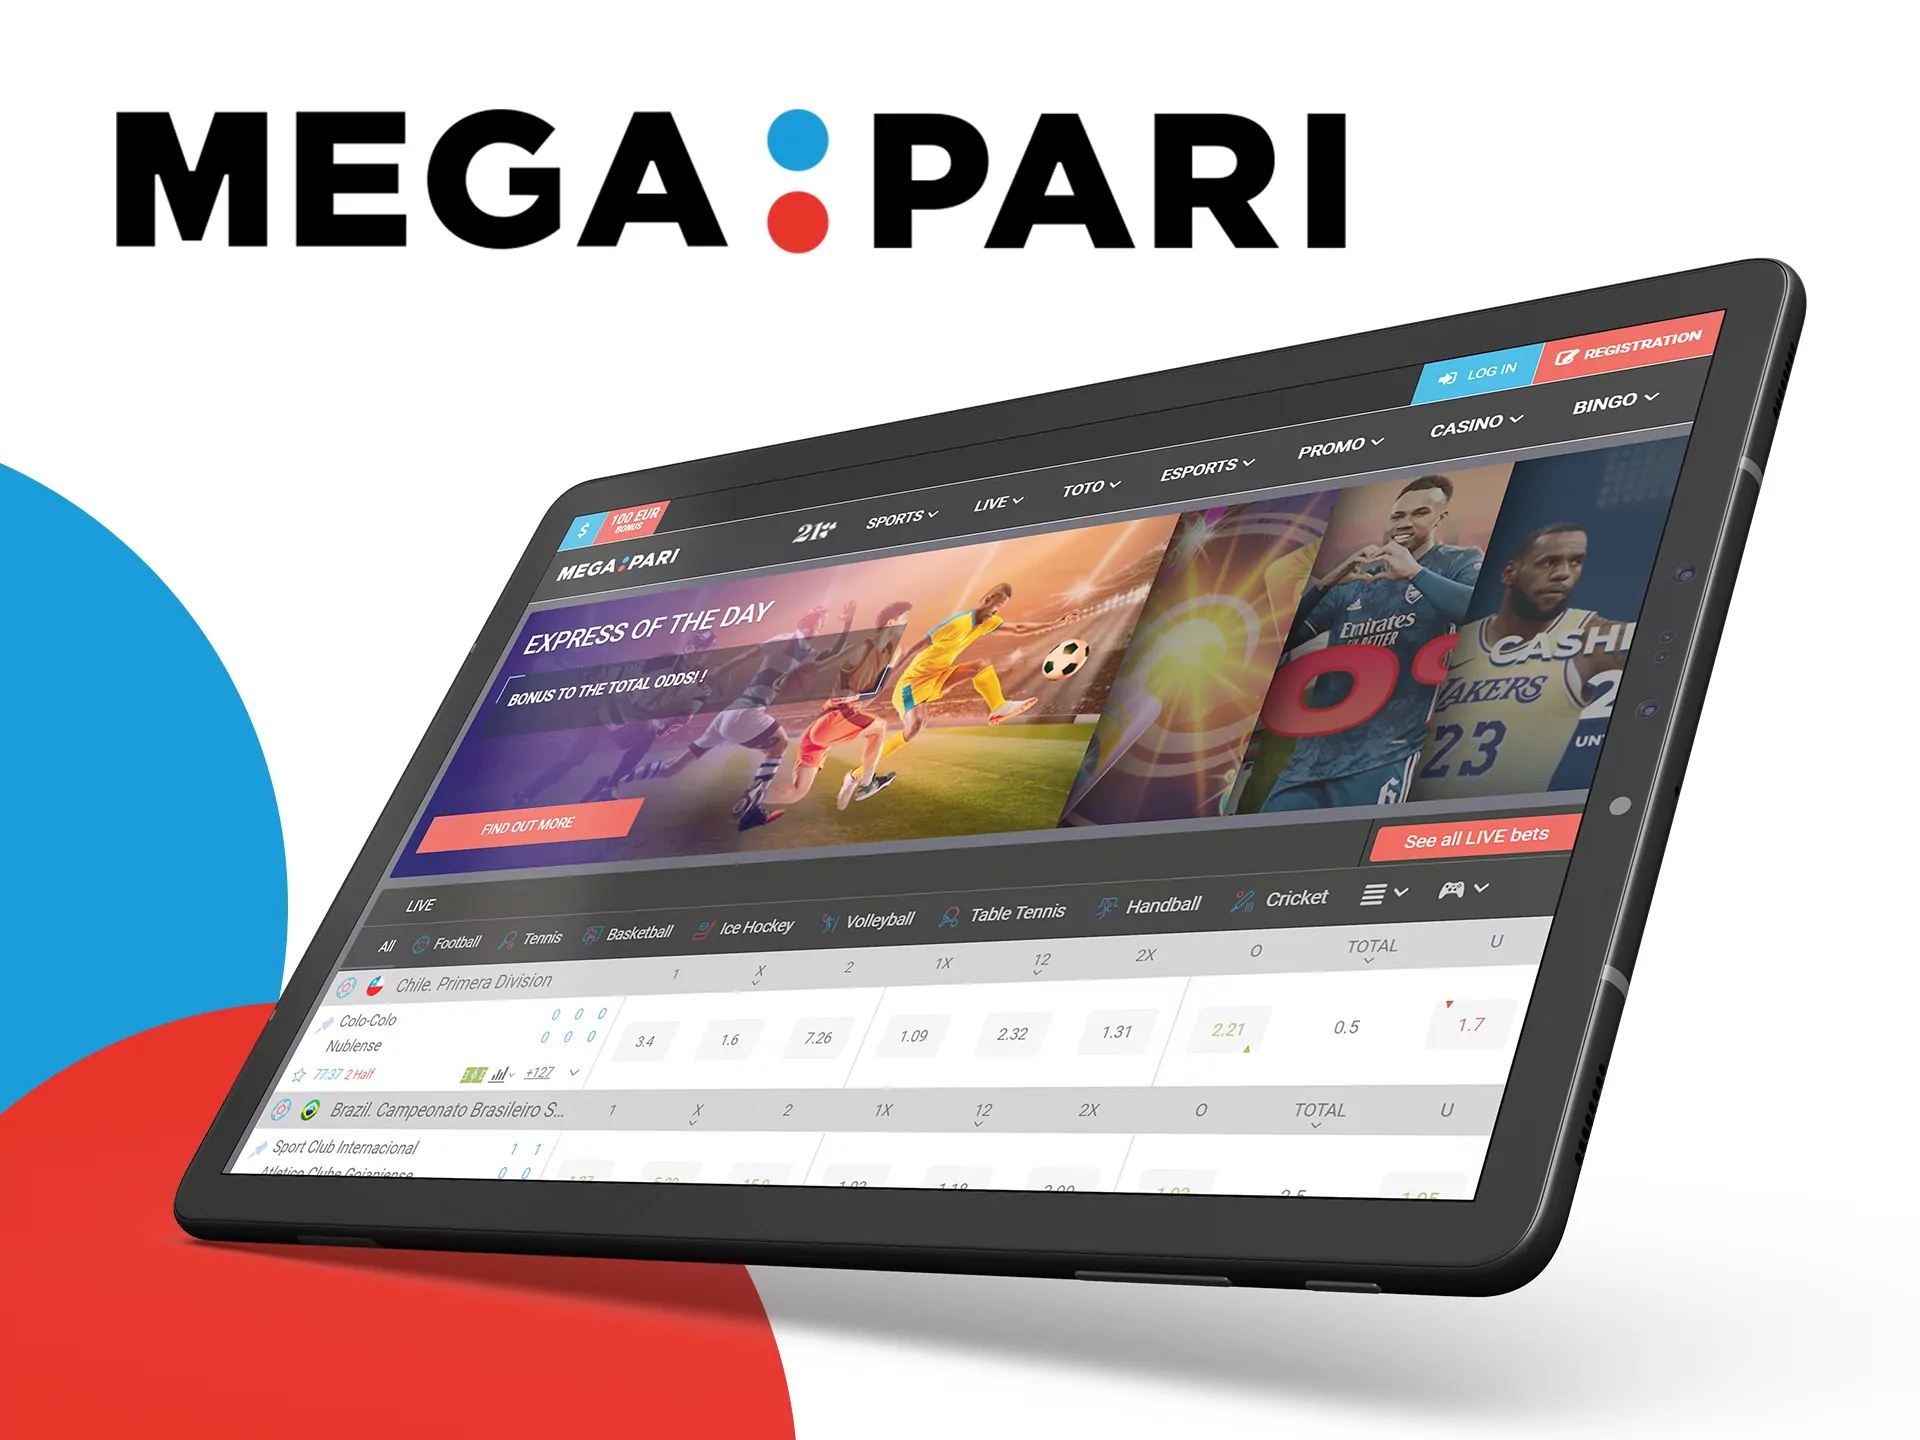 Play at the MegaPari website without downloading the app.